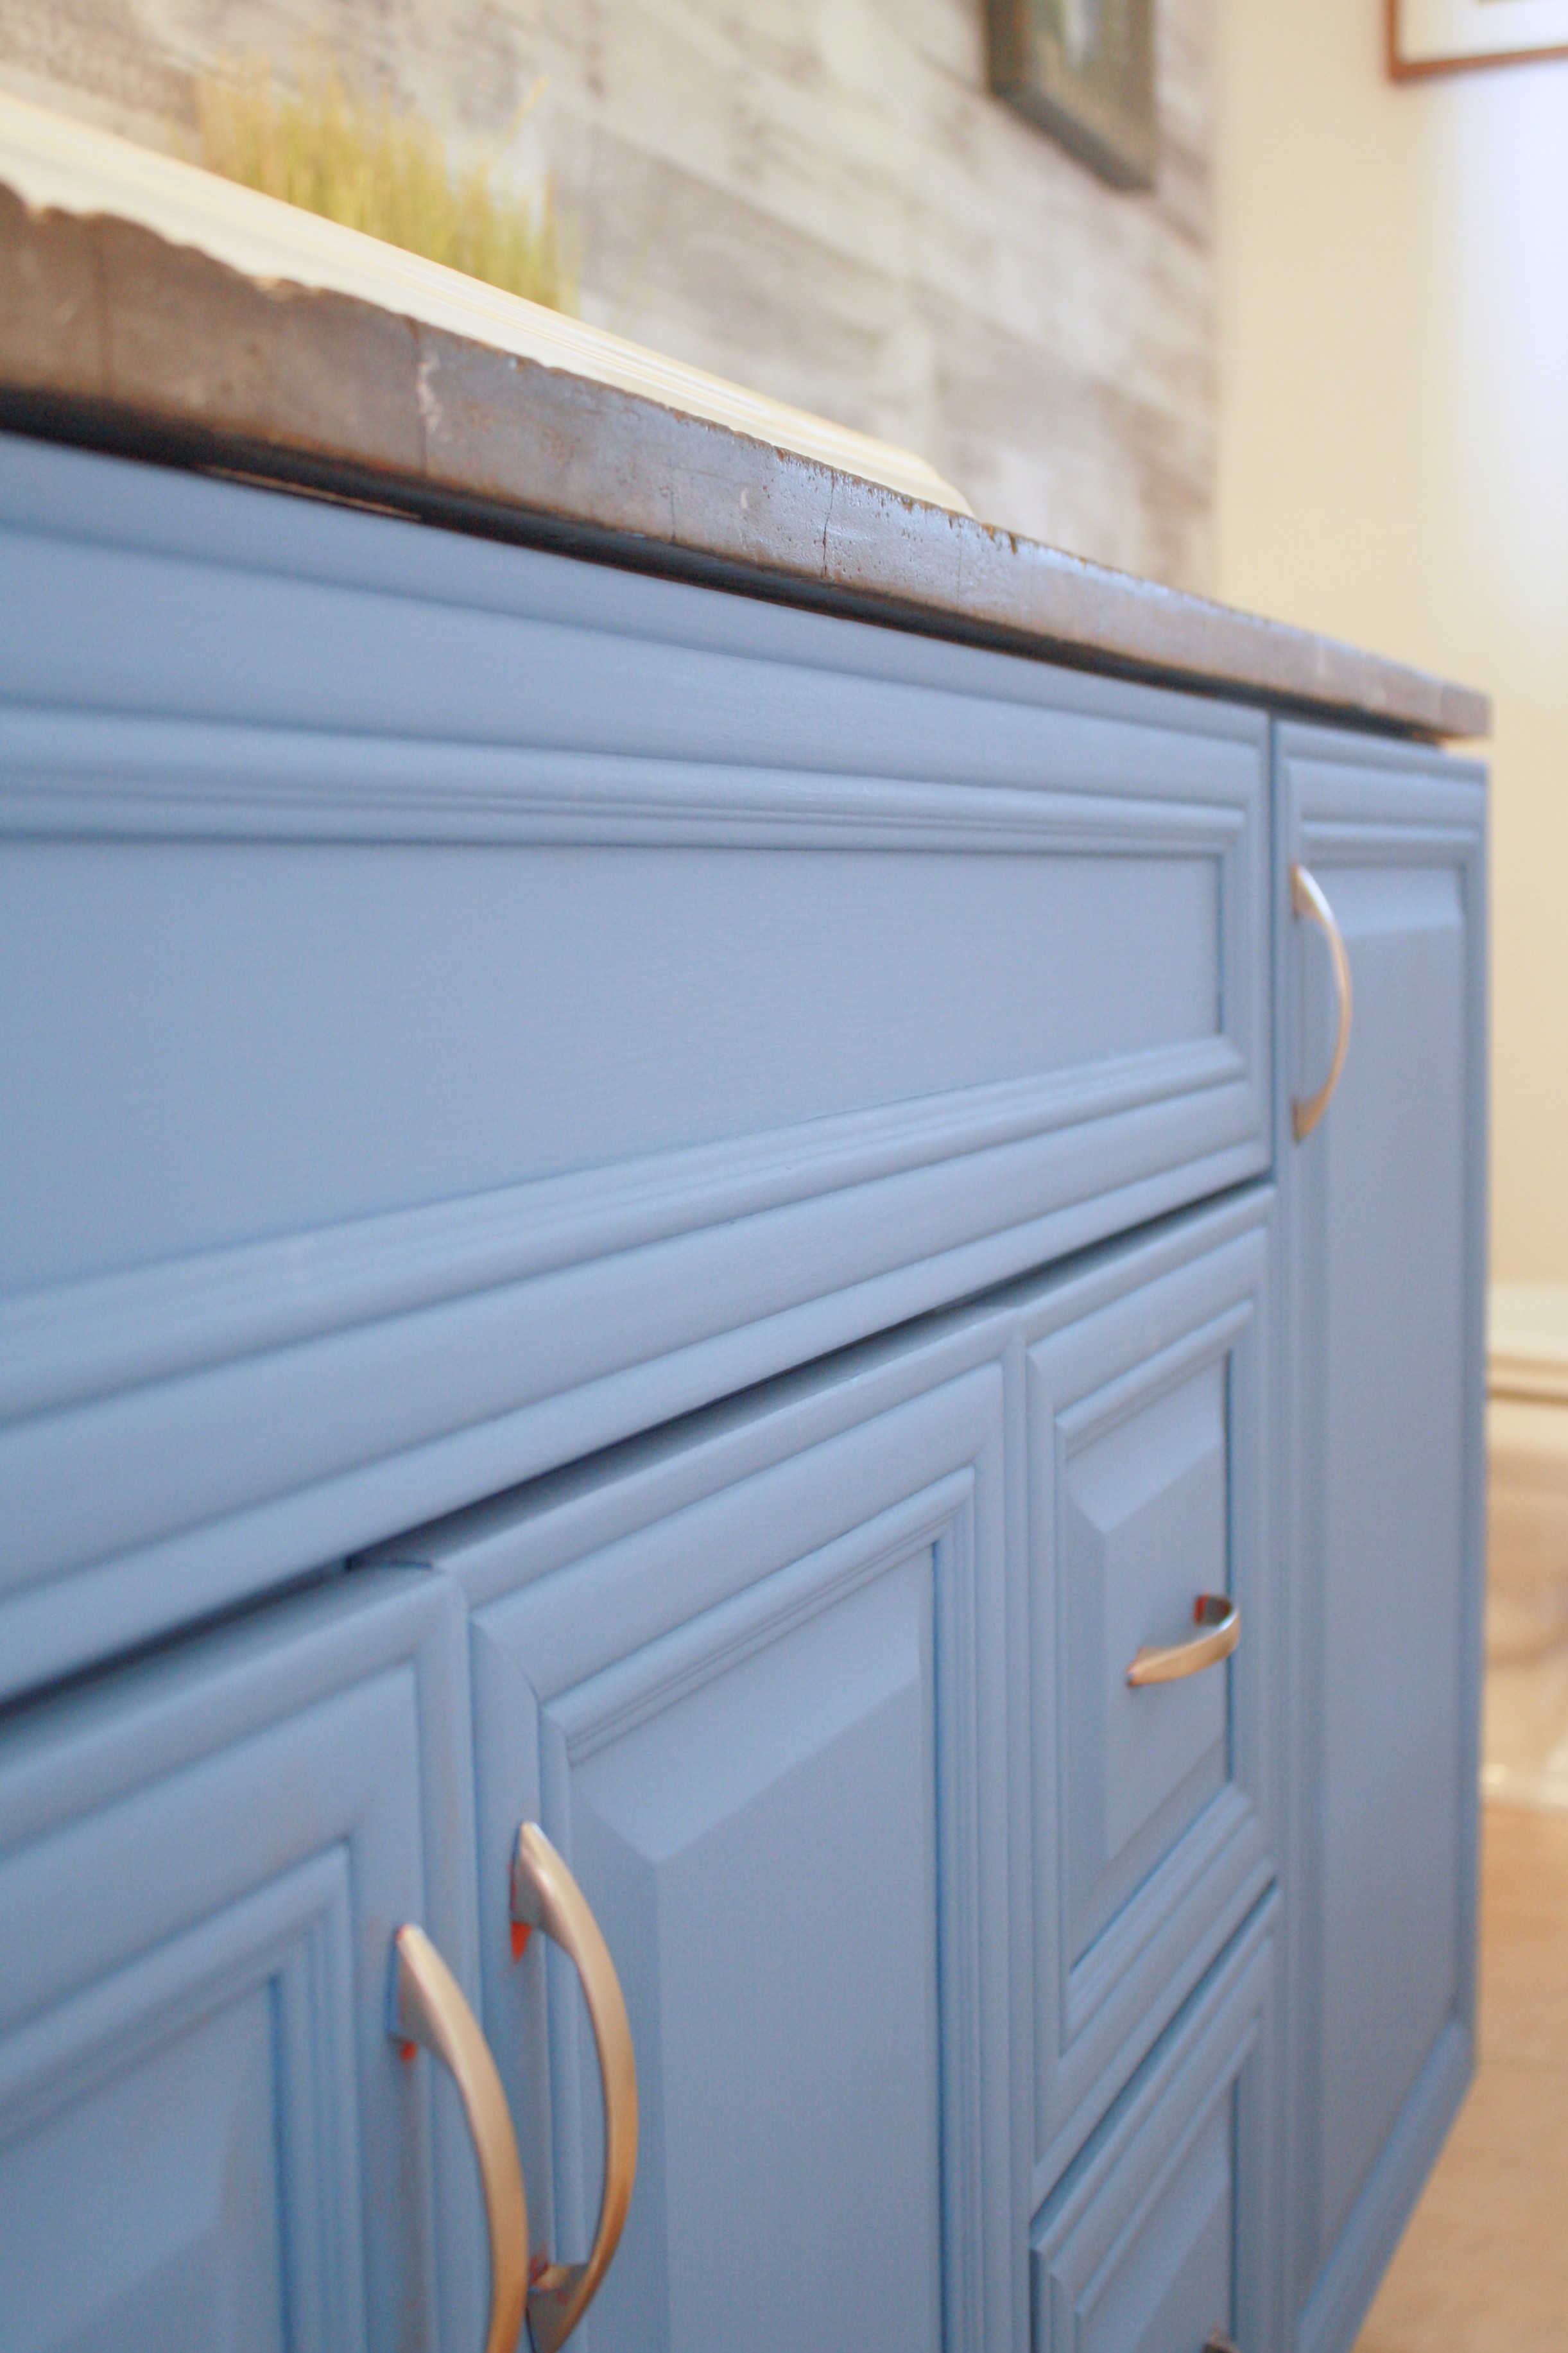 Blog Archive Bathroom Refresh With Chalk Paint® By Annie Sloan Annie Sloan Chalk Paint York